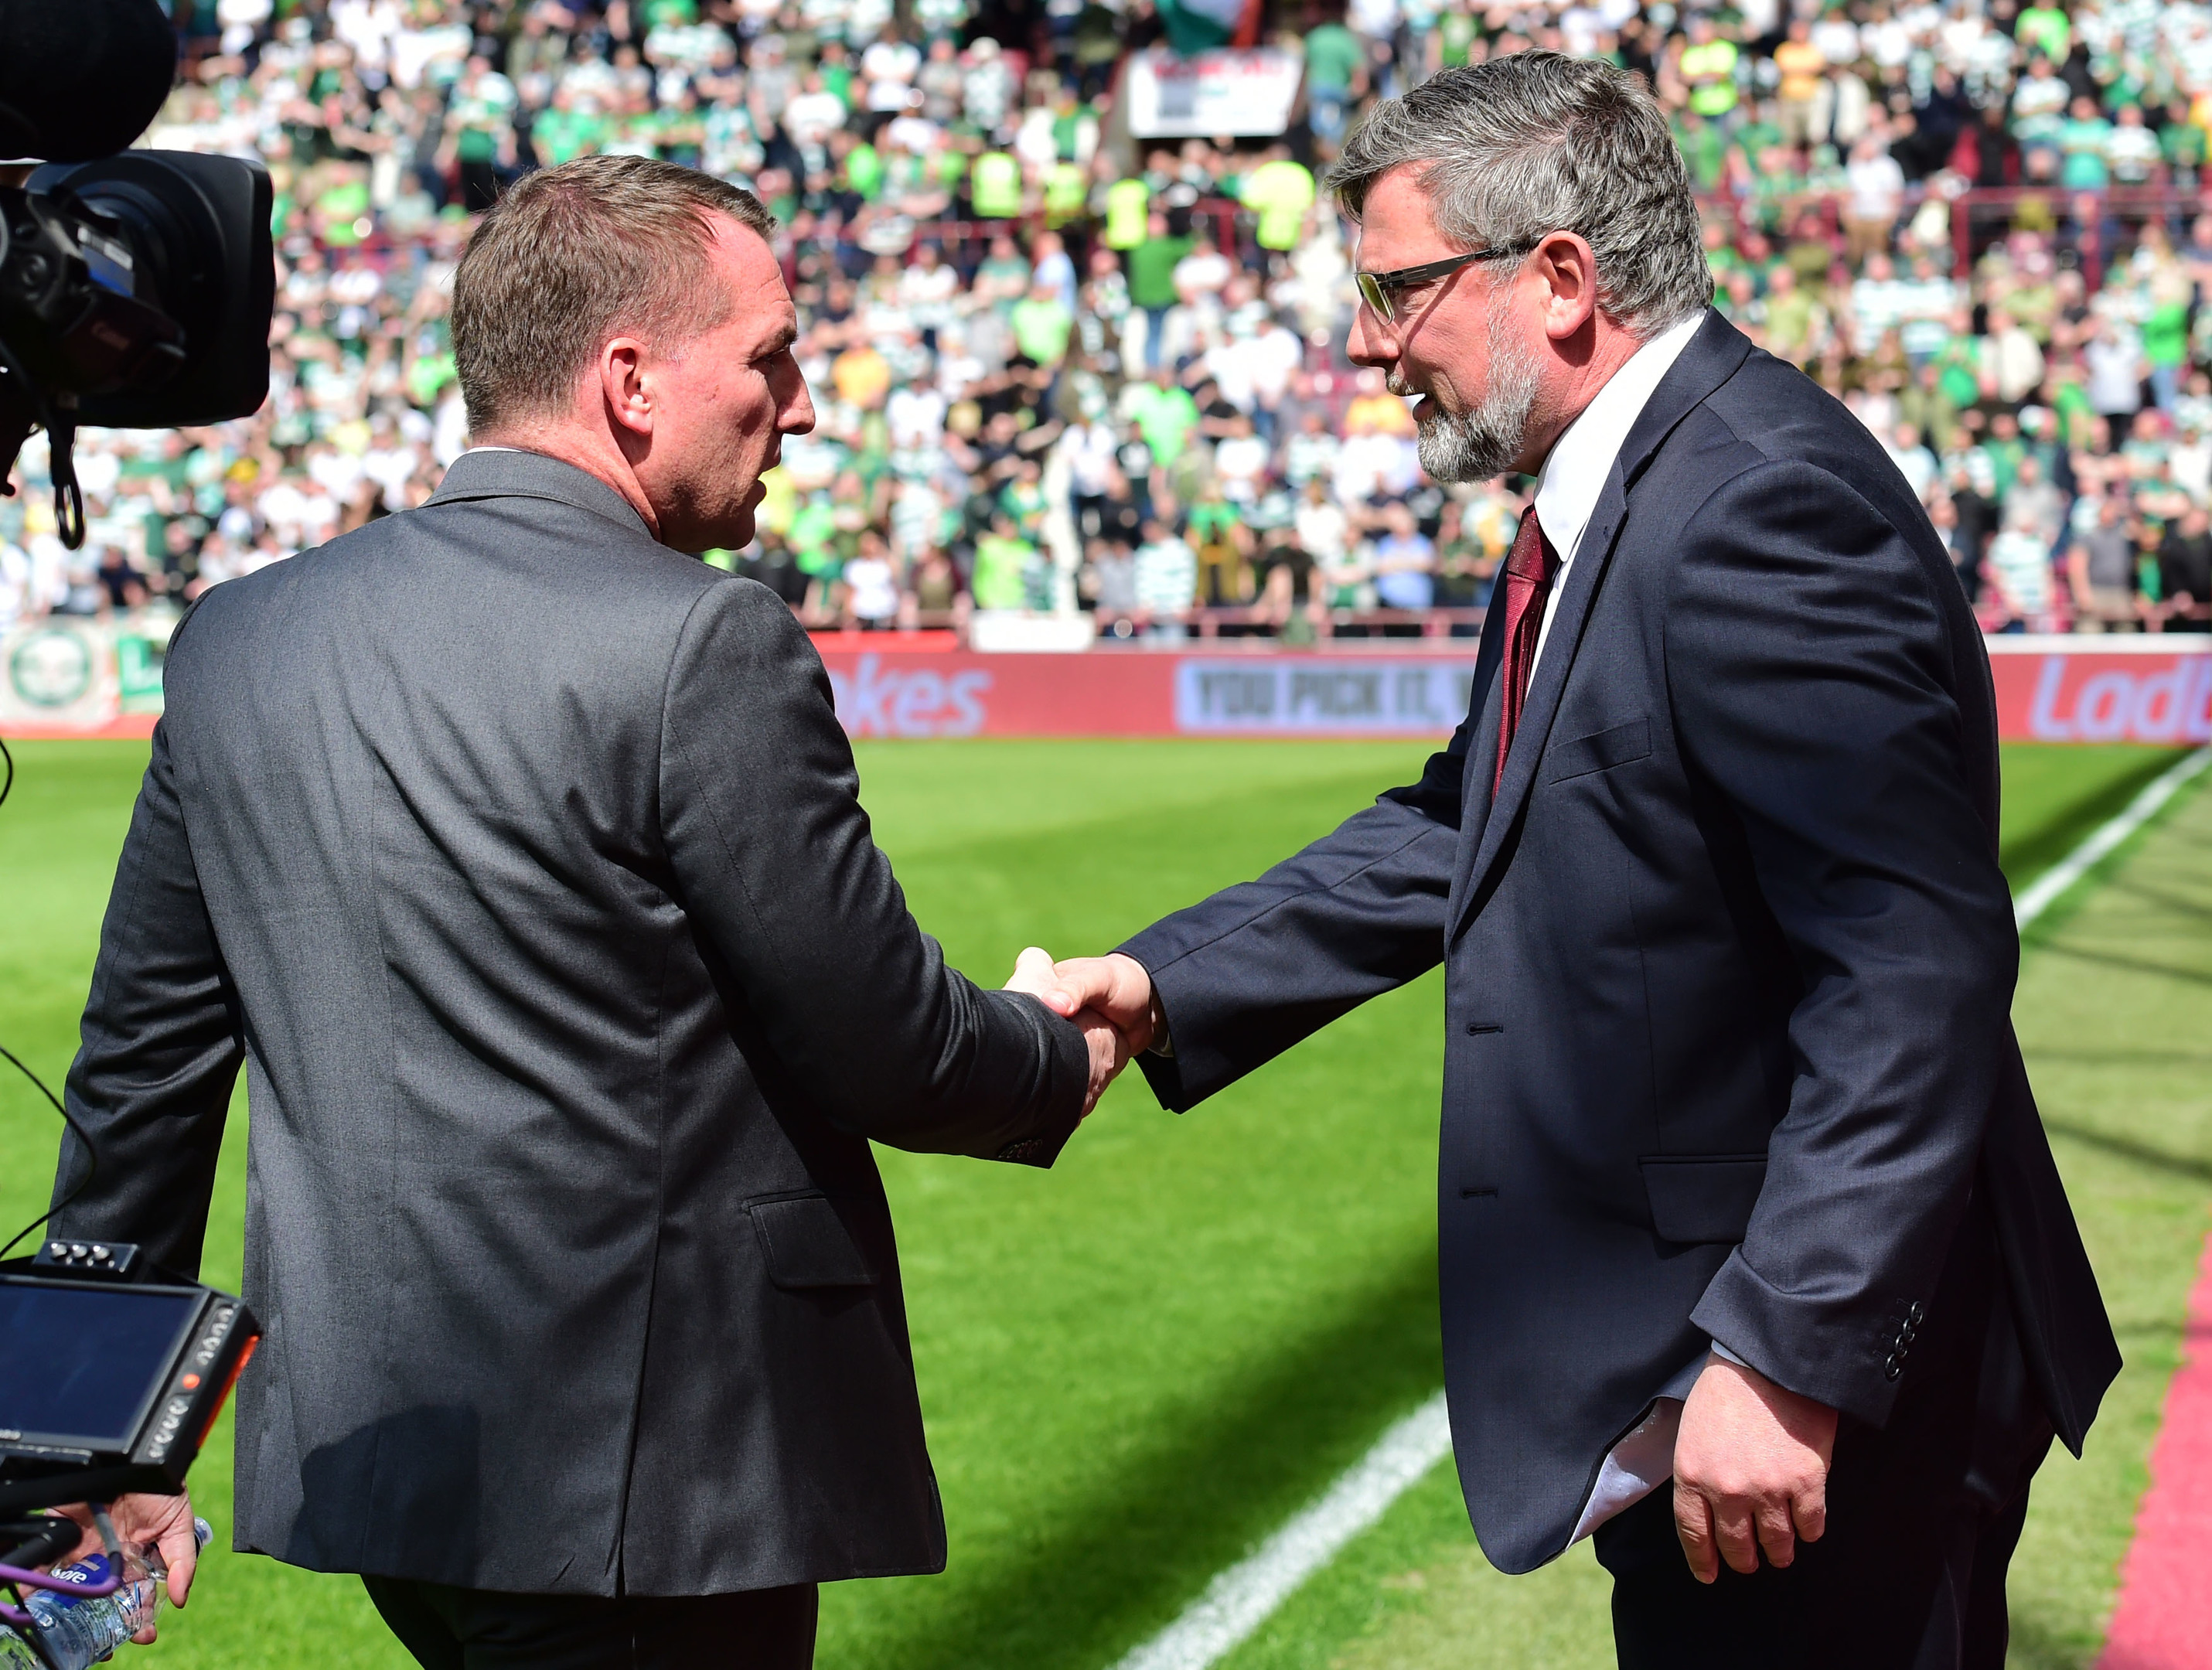 Celtic manager Brendan Rodgers (L) shakes hands with Hearts manager Craig Levein ahead of kick-off.